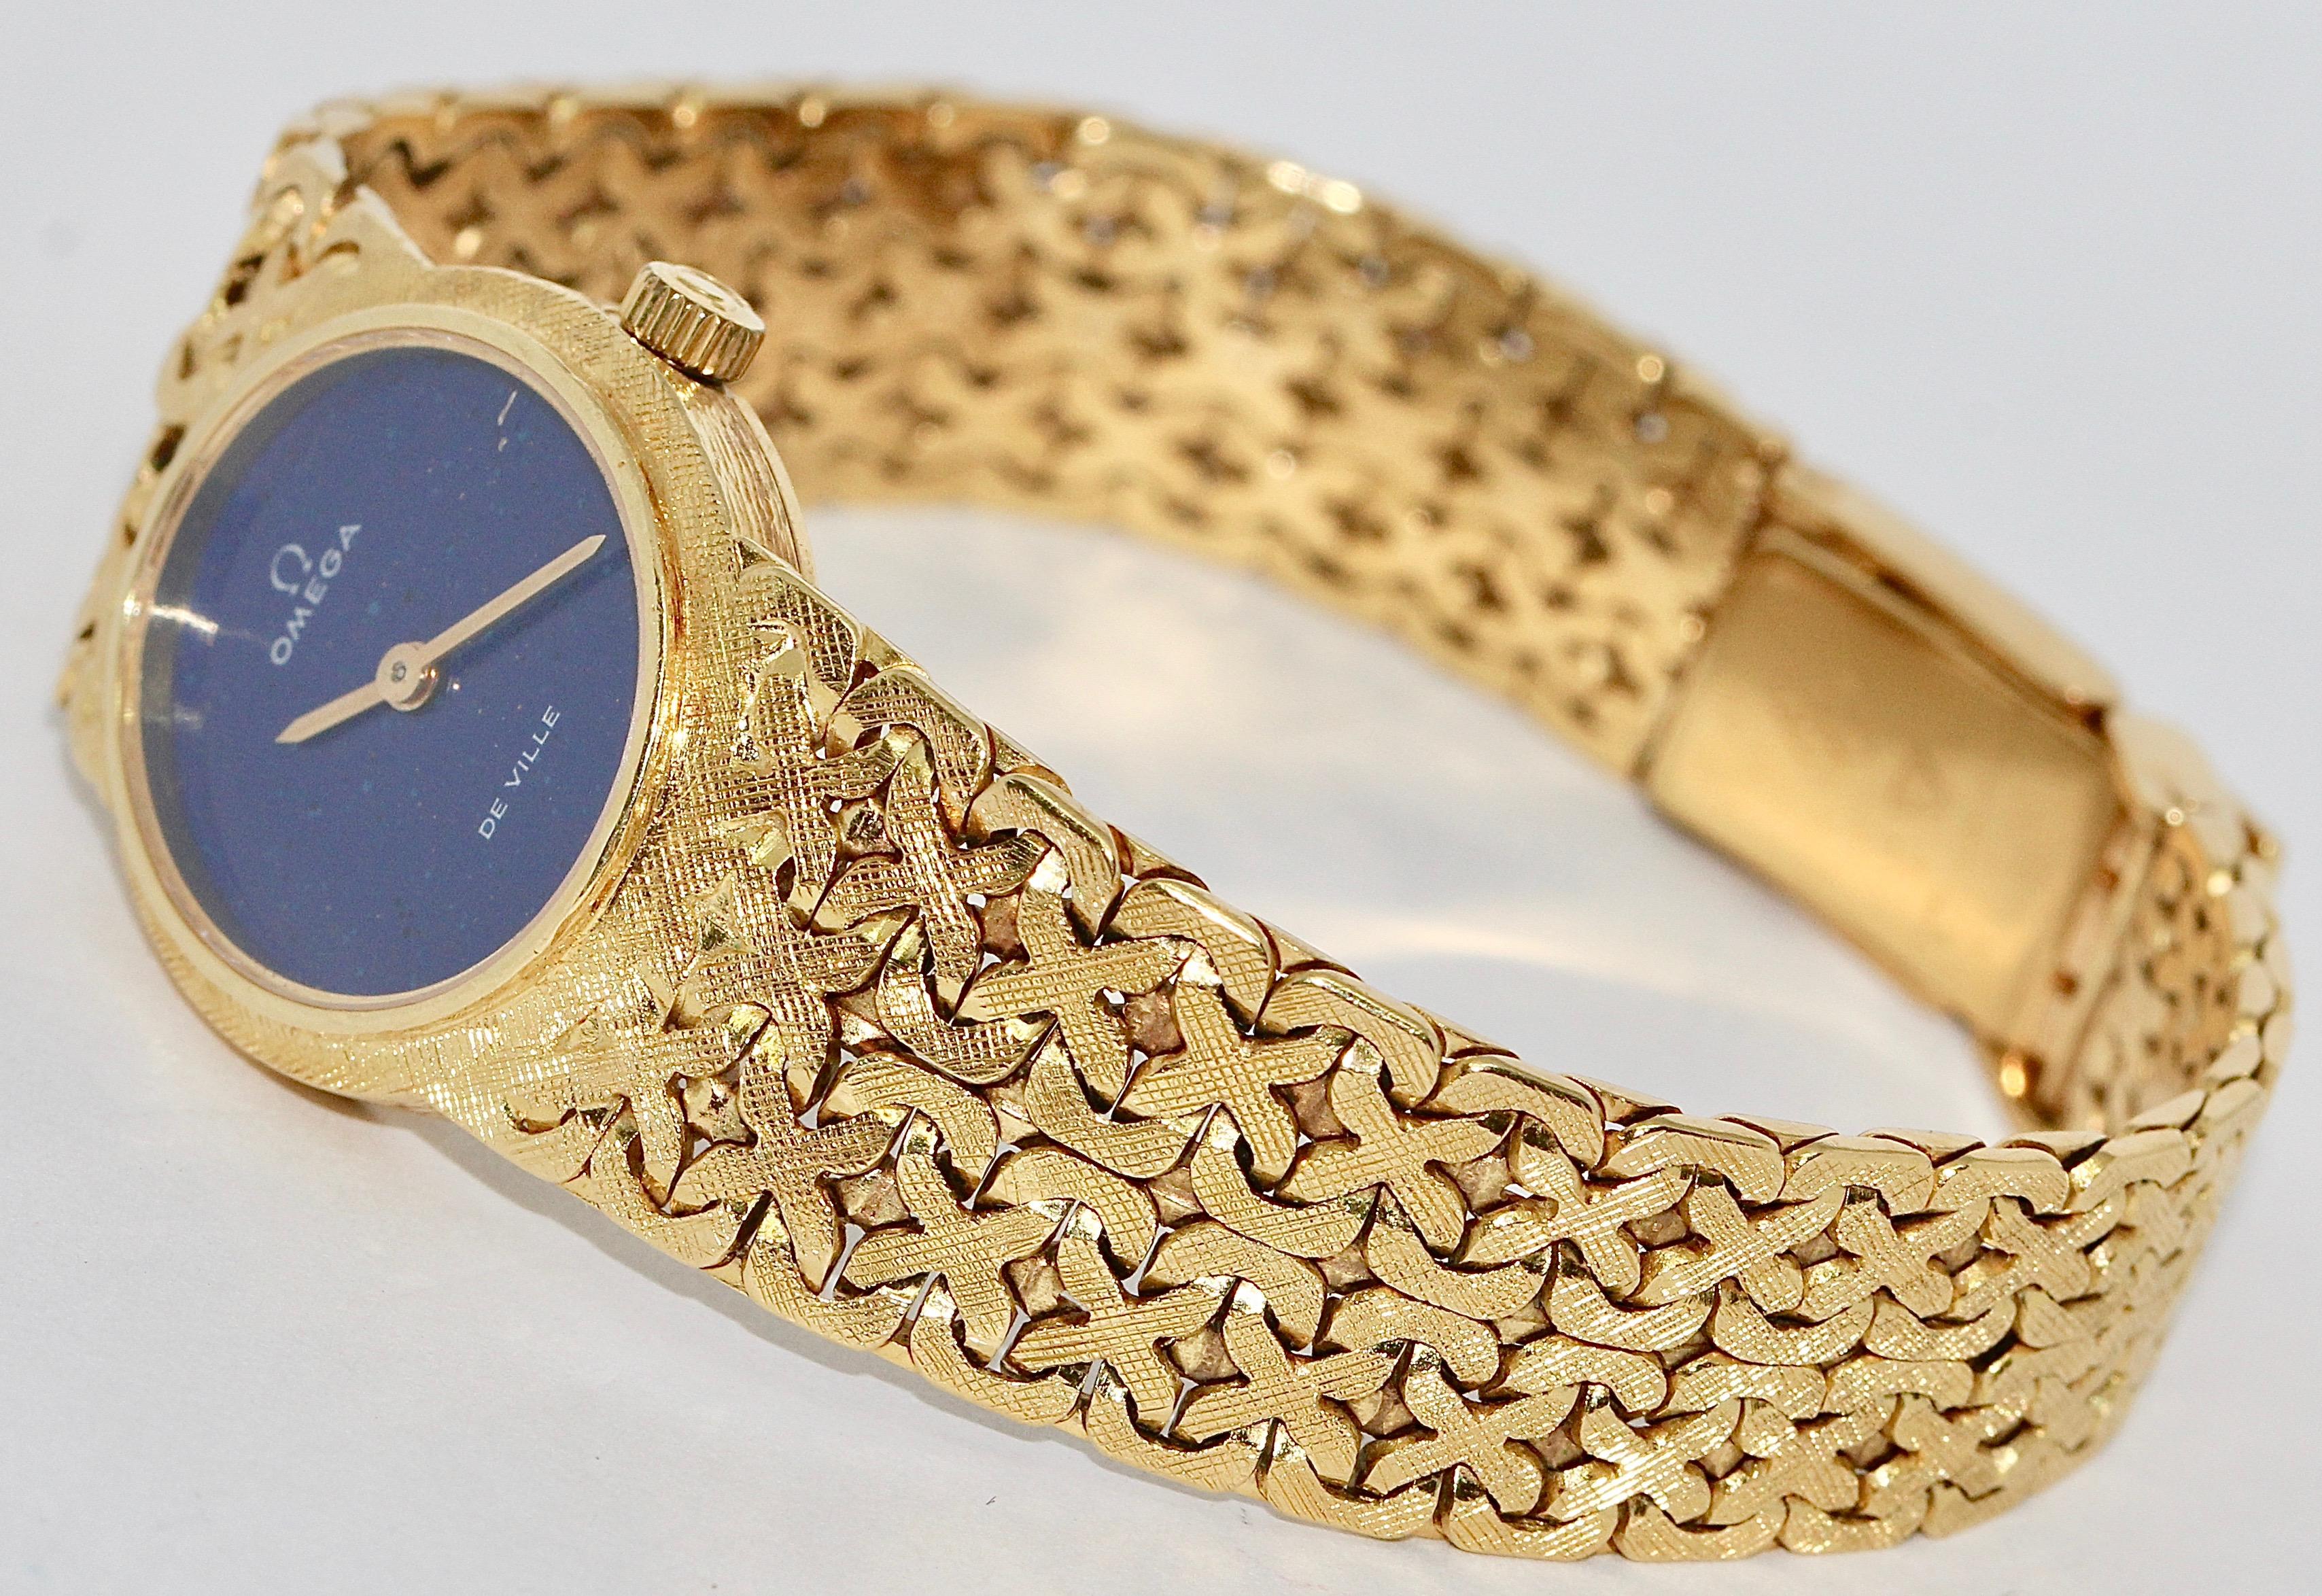 18 Karat Yellow gold ladies' watch, Omega De Ville, with lapis lazuli dial.

Mechanical manual wind movement.

Glass has small scratches on the glass.

Fully functional.

Including certificate of authenticity.